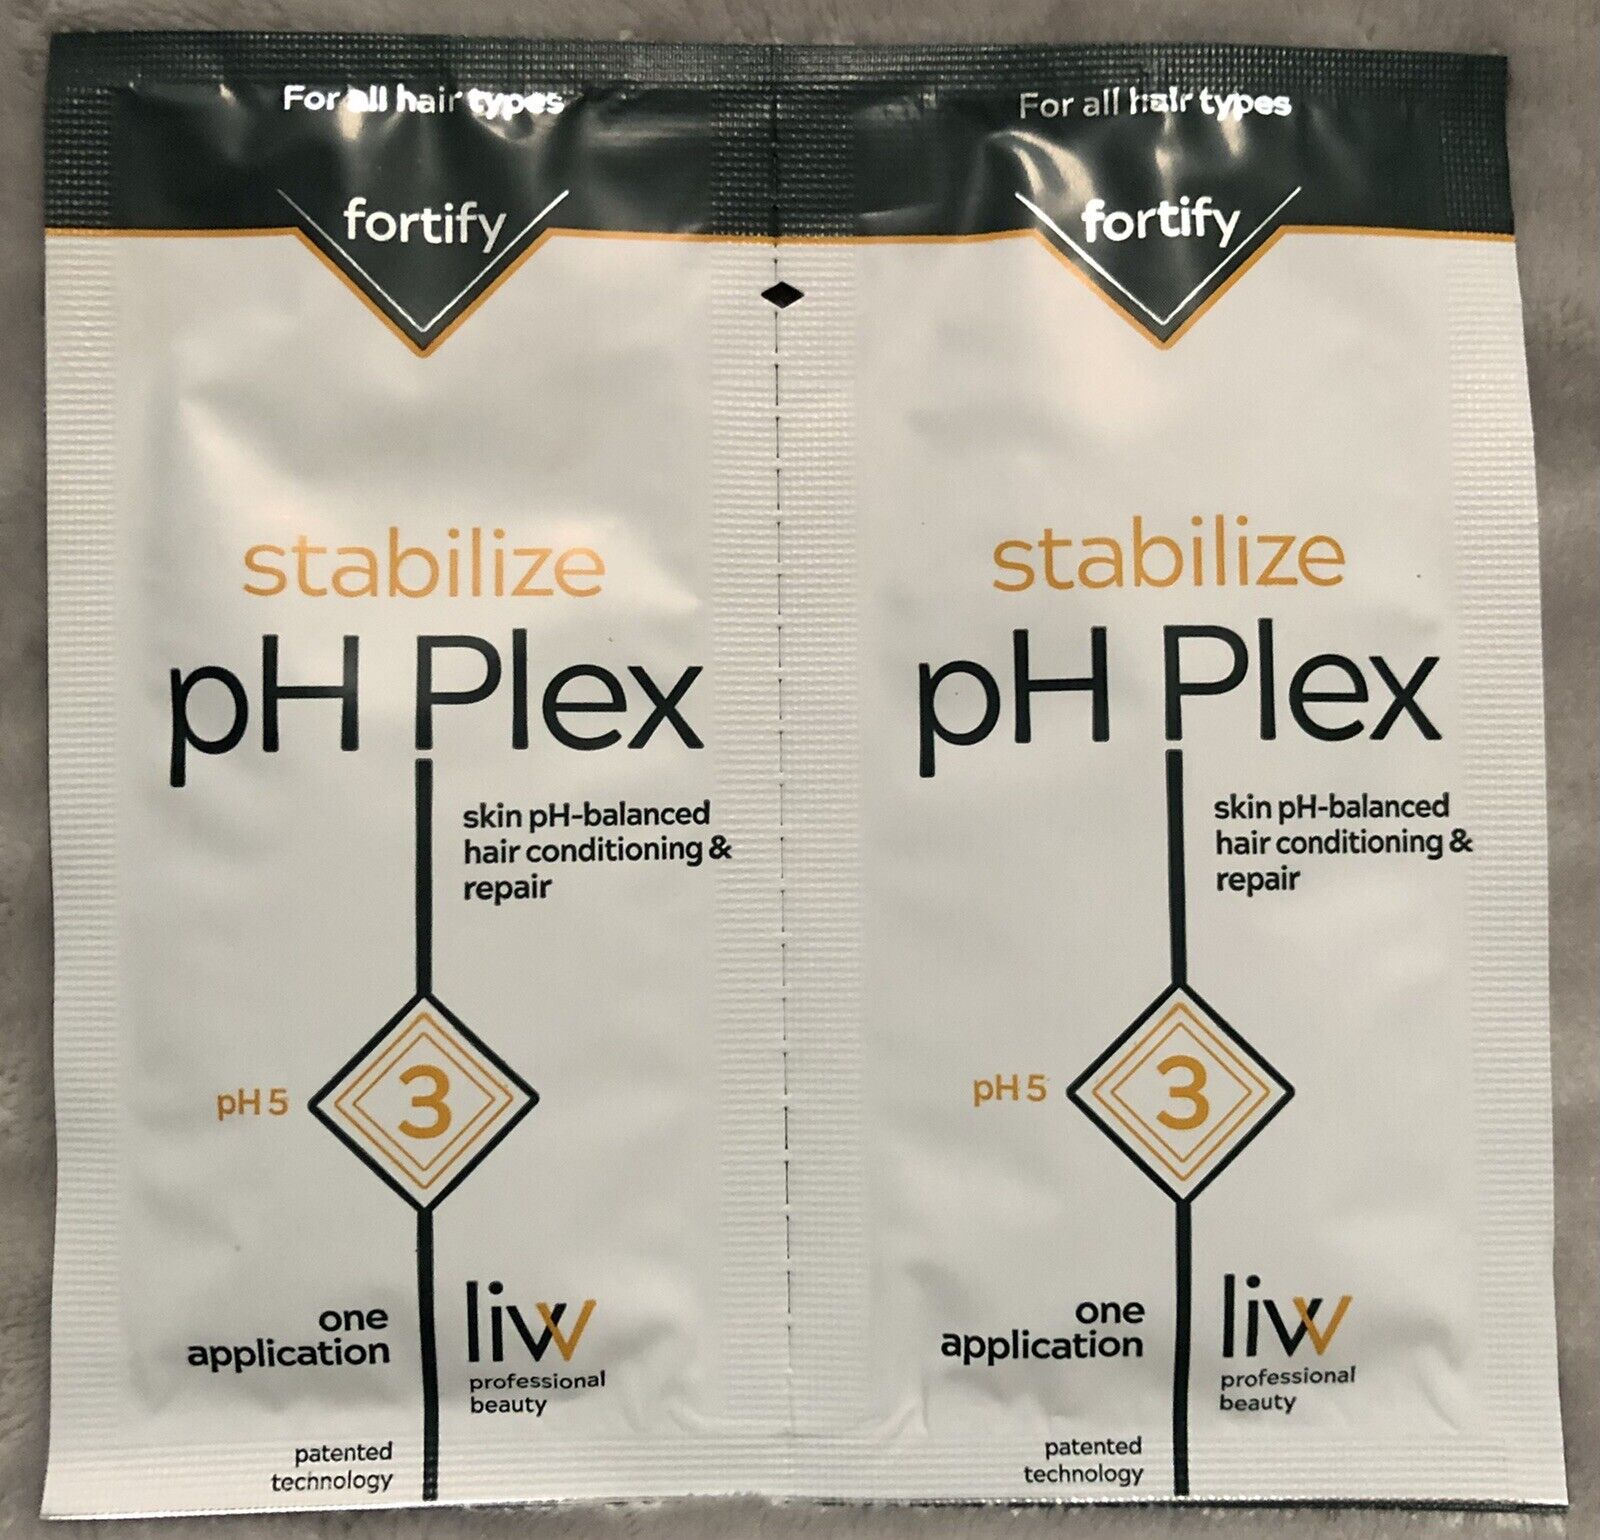 NEW X3 LIW professional beauty pH Plex 3 Stabilize Fortify Double Sachet  Packs